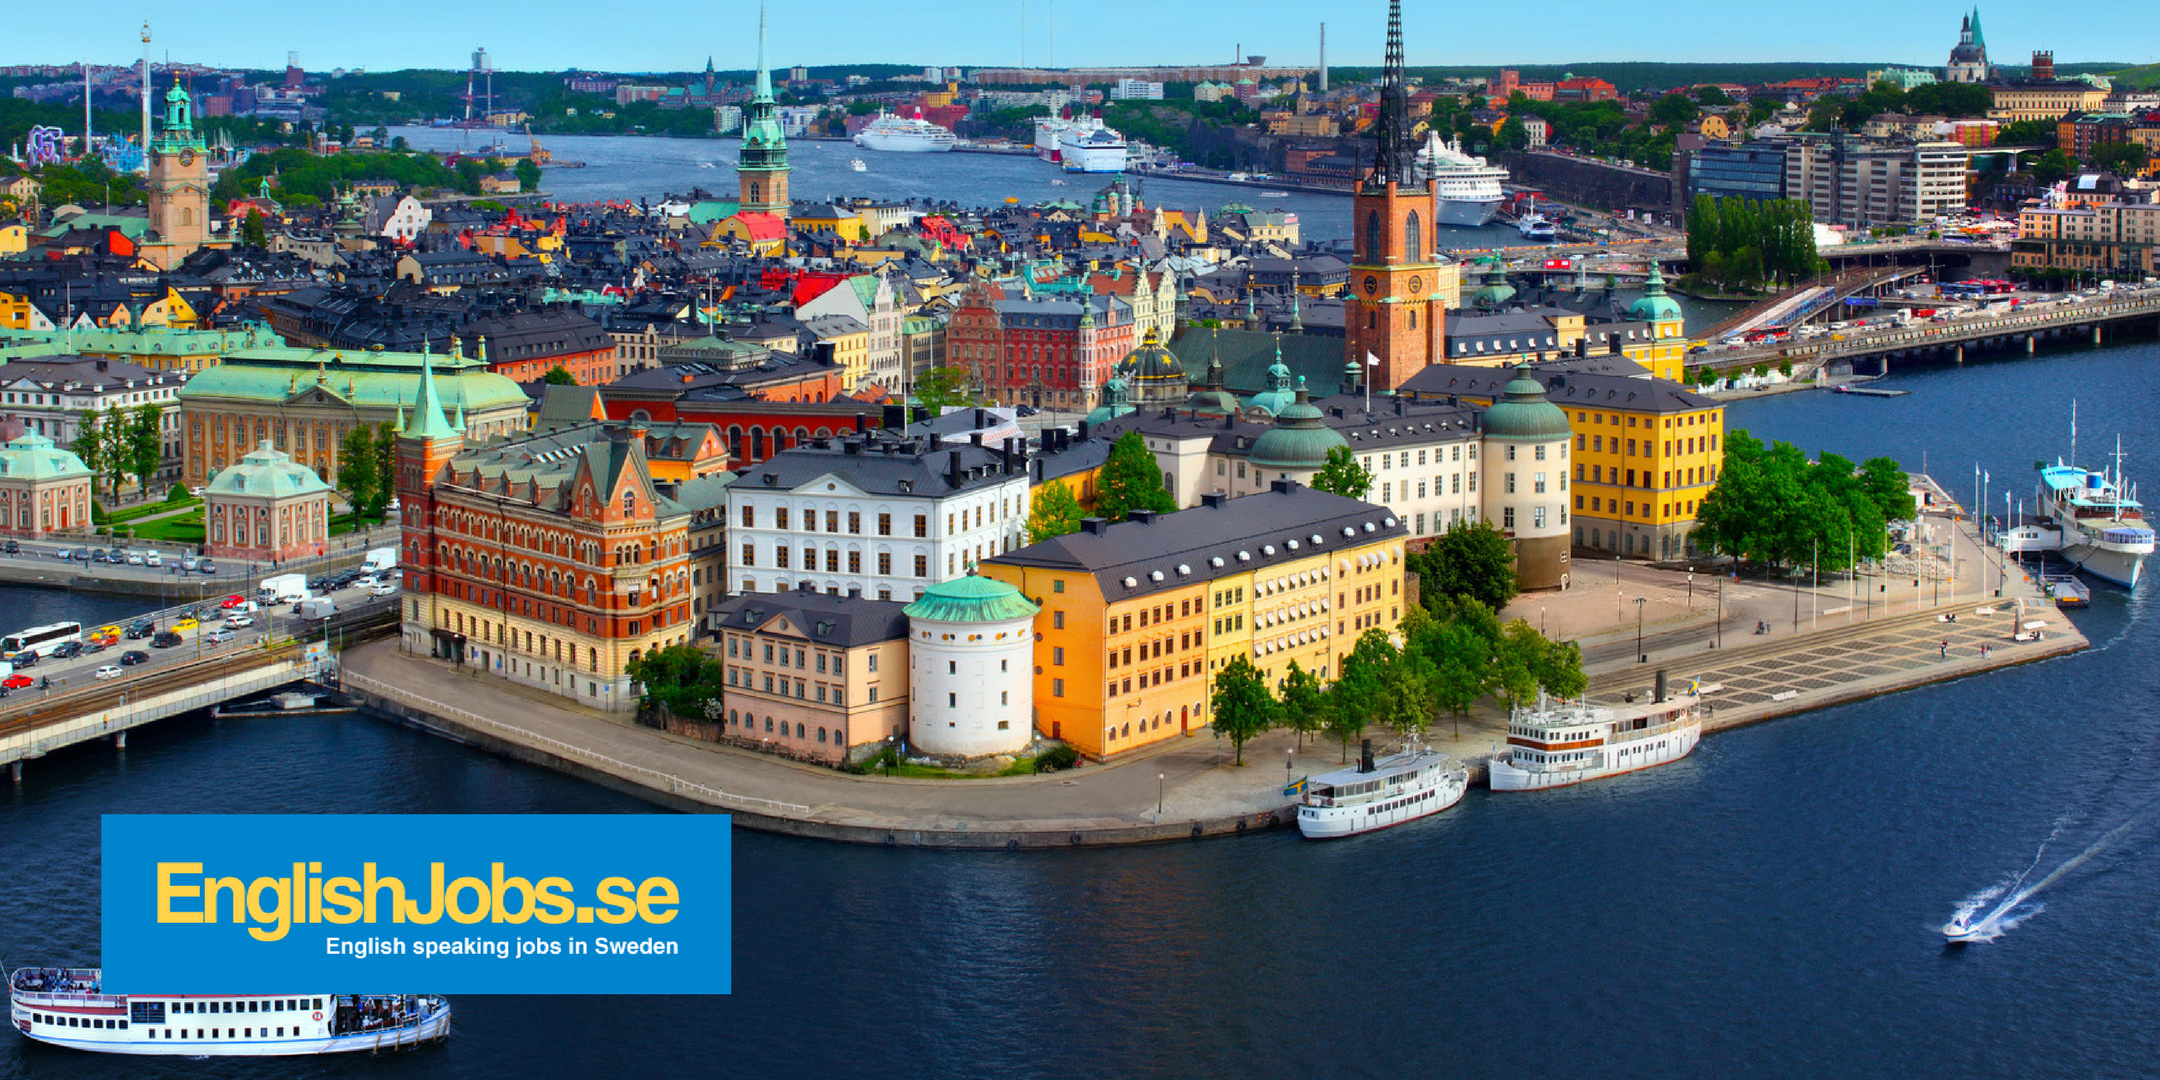 Work in Europe (Sweden, Denmark, Germany) - Your job search from Phoenix to Stockholm